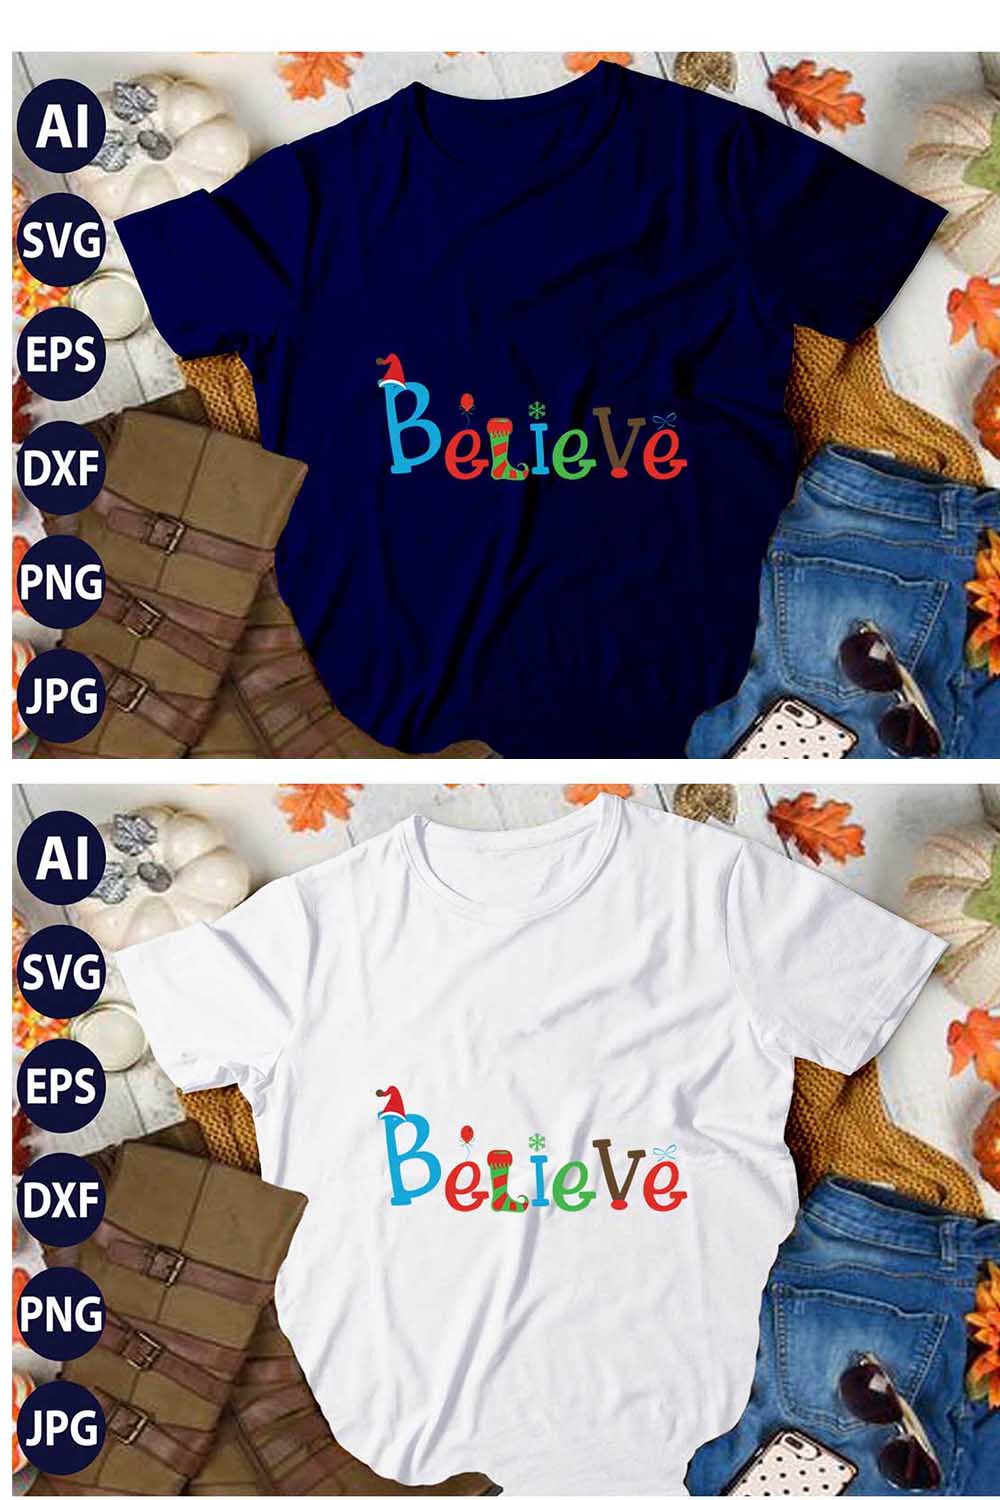 Believe Christmas, SVG T-Shirt Design |Christmas Retro It's All About Jesus Typography Tshirt Design | Ai, Svg, Eps, Dxf, Jpeg, Png, Instant download T-Shirt | 100% print-ready Digital vector file pinterest preview image.